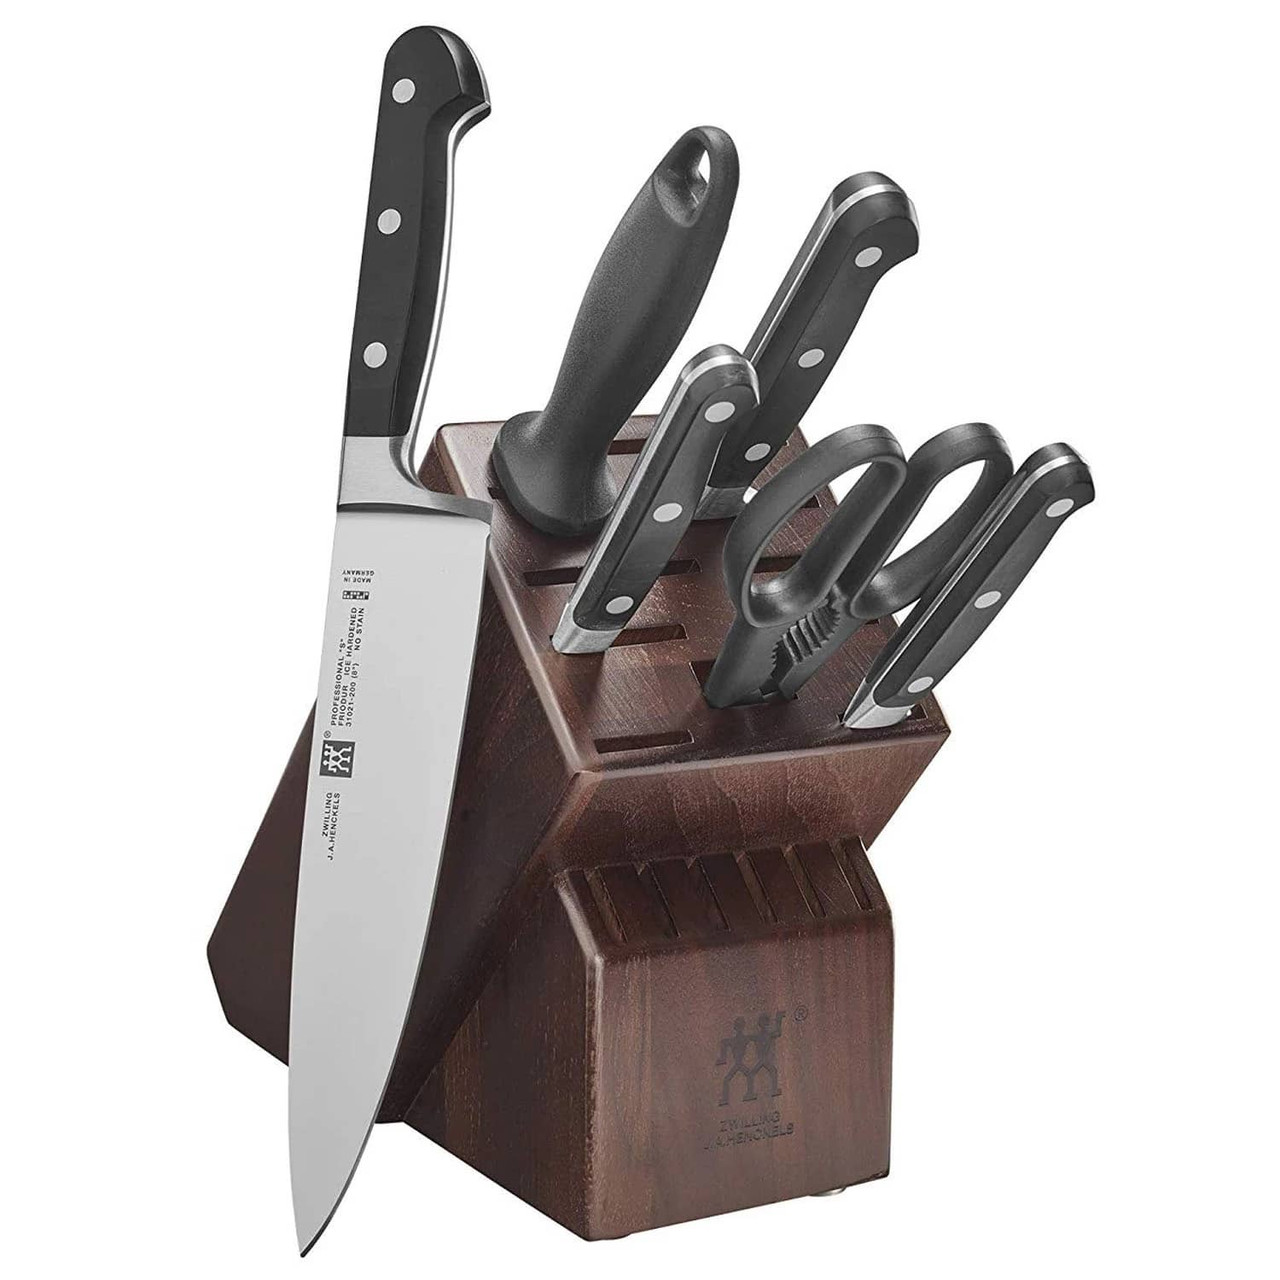 https://cdn11.bigcommerce.com/s-hccytny0od/images/stencil/1280x1280/products/2643/9337/zwilling-professional-s-7pc-knife-block-set-walnut__56223.1564319409.jpg?c=2?imbypass=on